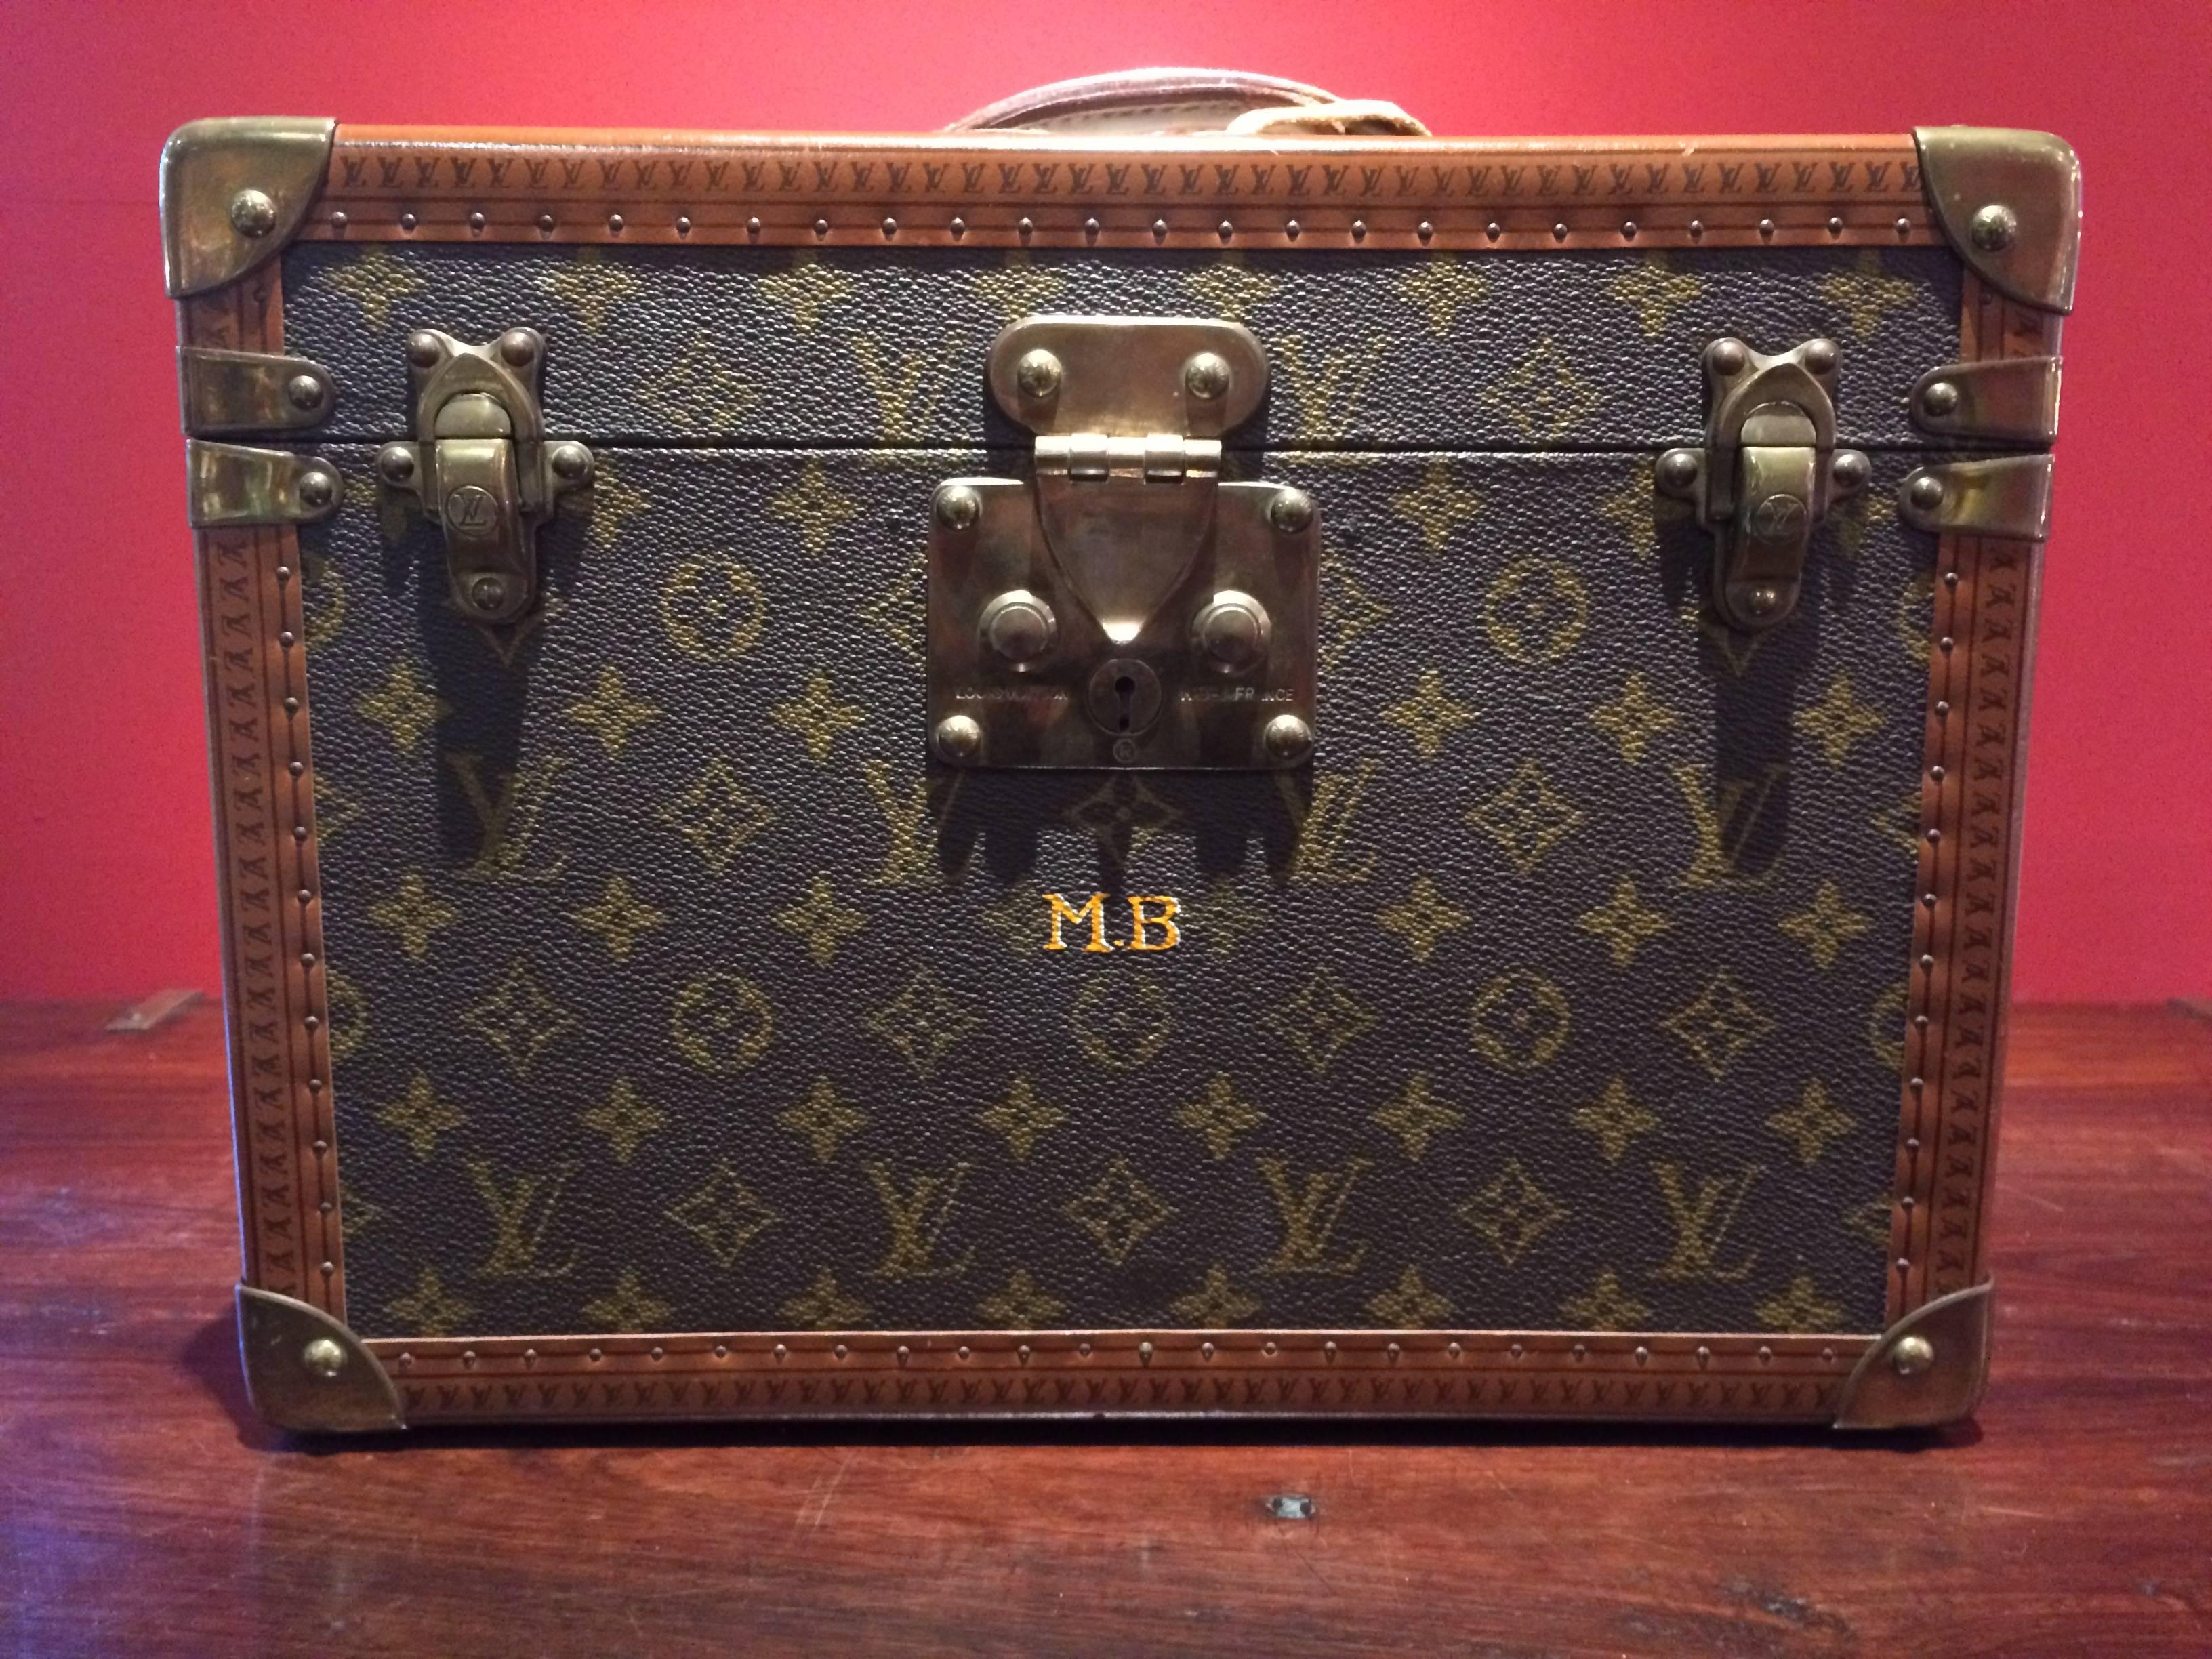 Vintage Monogramed Toiletry case. 
Original personalised Initials MB stamped in gold on the front.
Original Luggage tag.
Brass fittings.
Leather top handle.